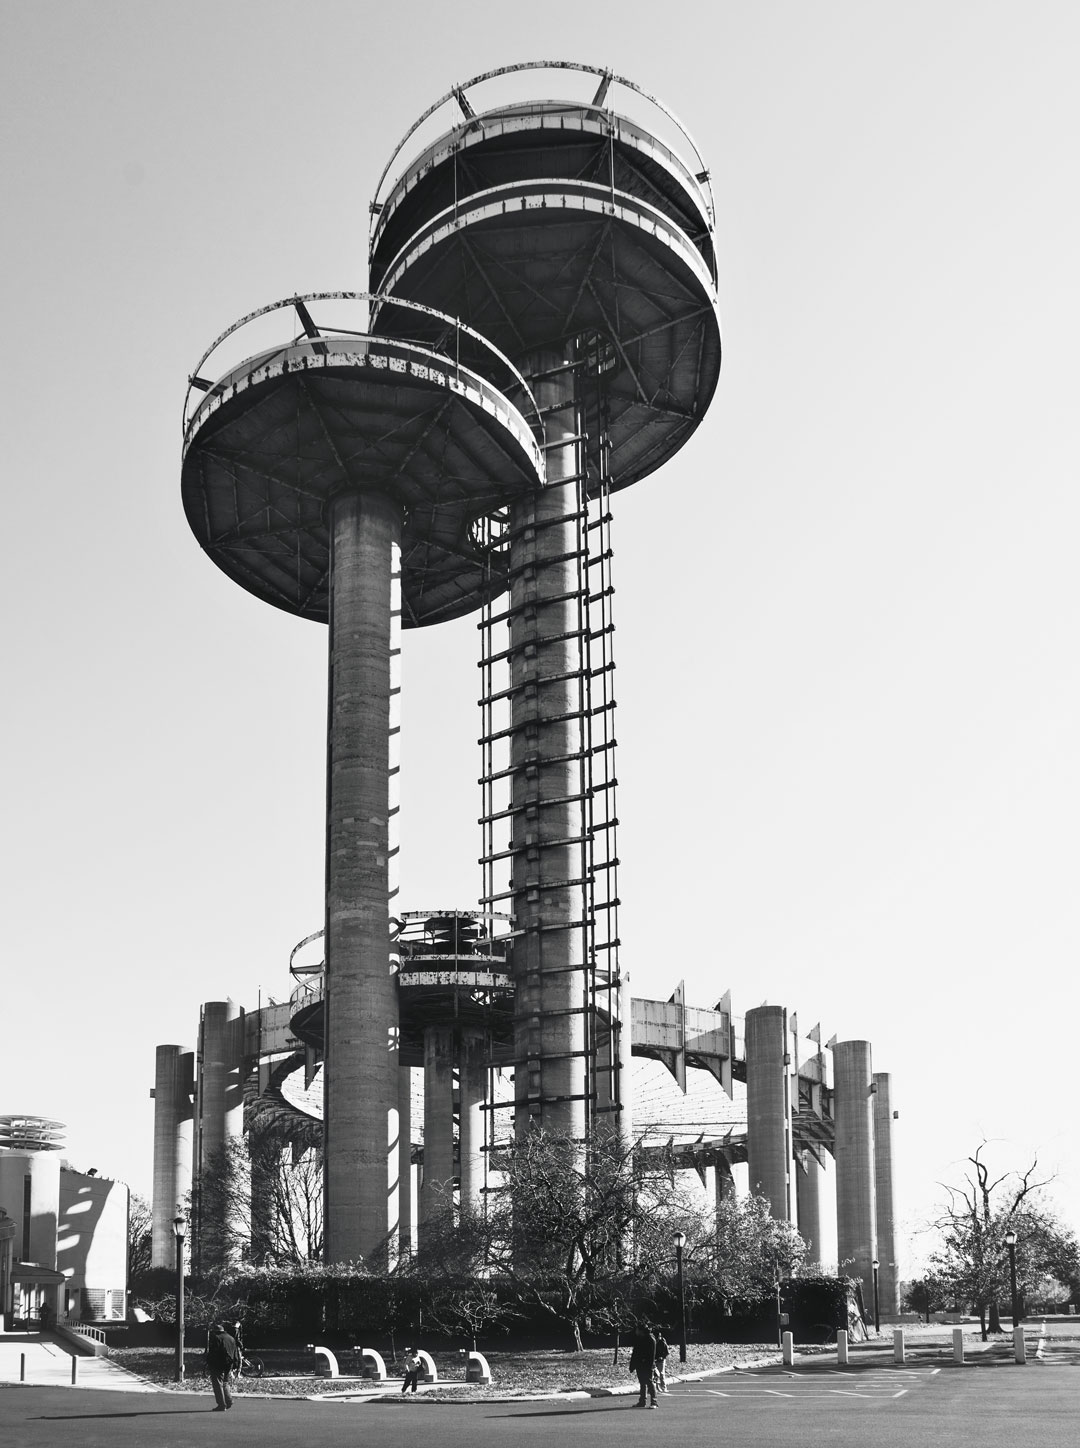 North view of the New York State Pavilion by Philip Johnson and Richard Foster, New York, 1964, with the observation towers in the foreground. © Ezra Stoller/Esto